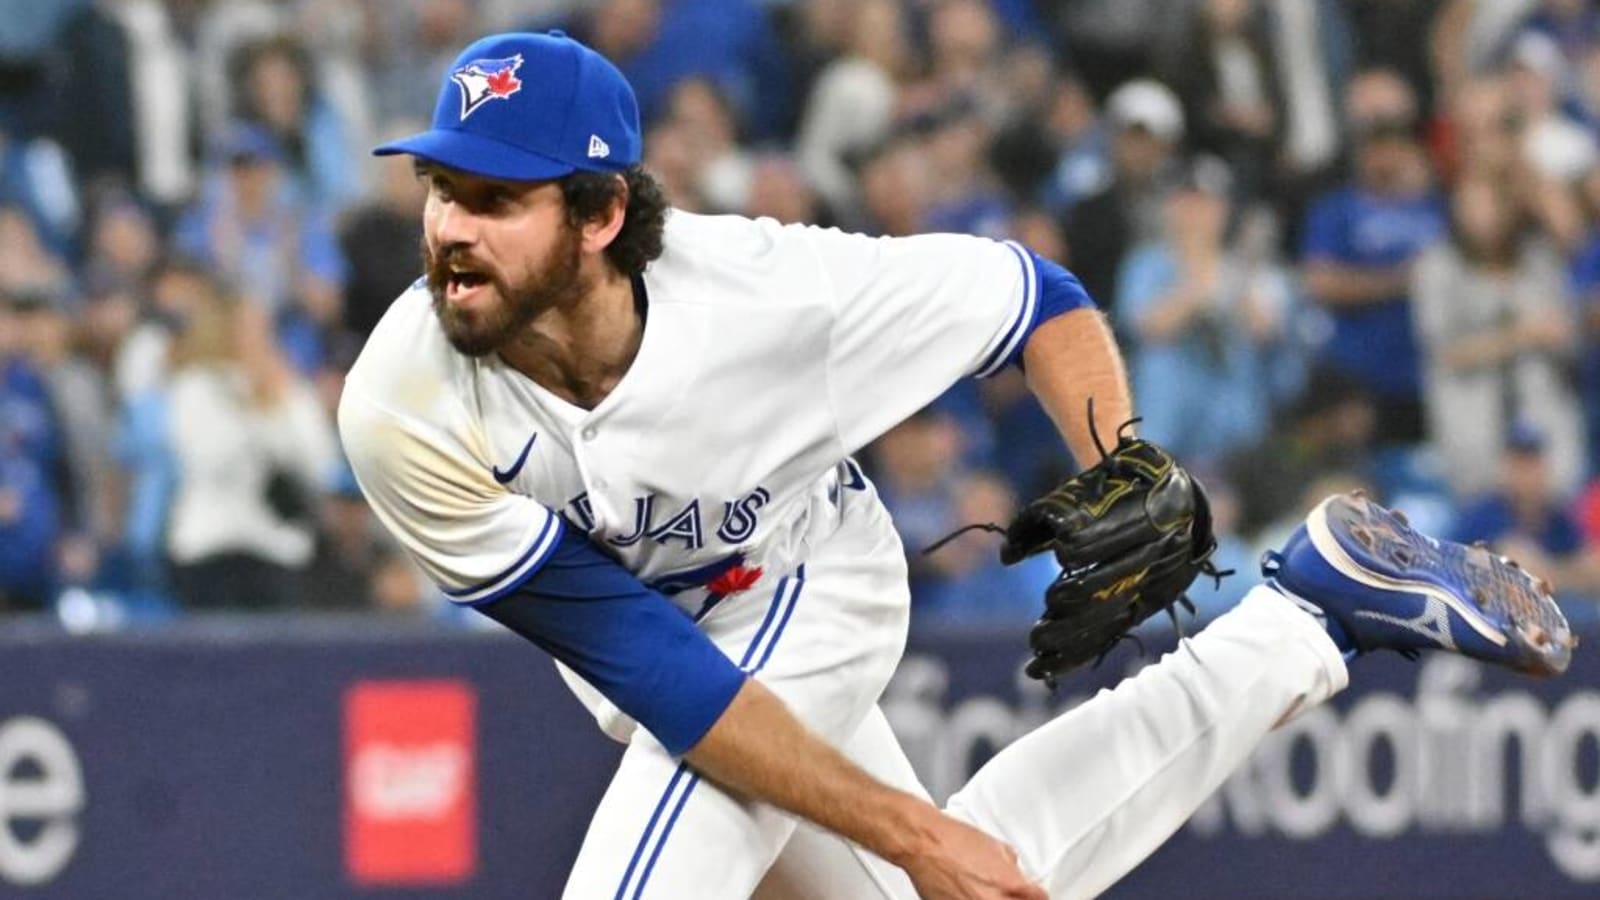 Watch Detroit Tigers vs Toronto Blue Jays in the MLB free live stream, TV channel and start time Yardbarker